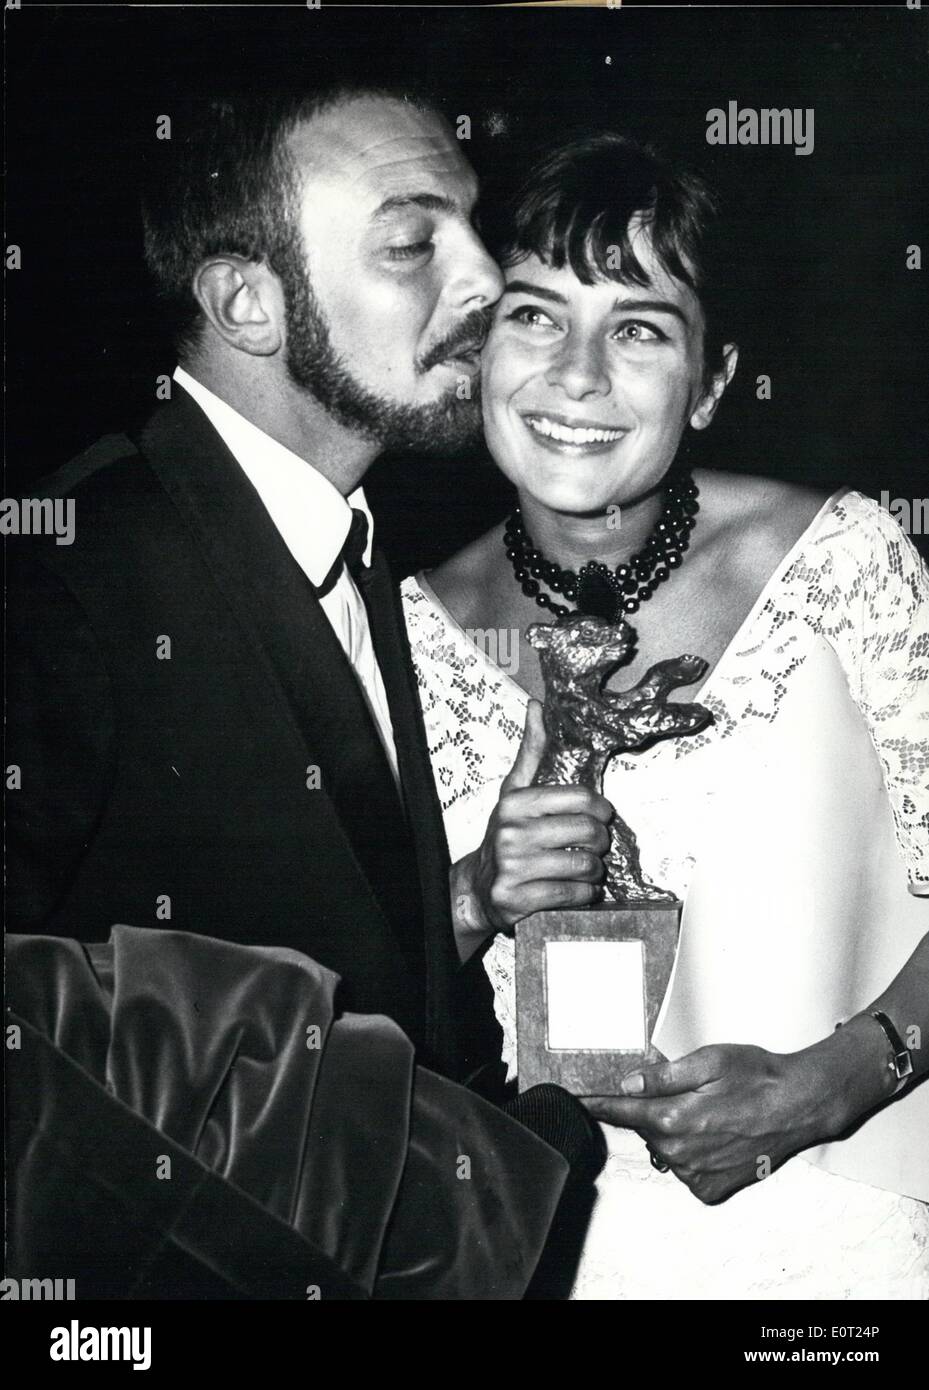 Jul. 07, 1960 - Presentation of International film prizes: As conclusion of the Berlin Film Festival 1960 in the evening of July 5th, 1960 the film prizes Golden and Silver Bears'' were presented. For the best female part the French fil actress Juliette Mayniel (Juliette Mayniel) was awarded a ''Silver Bear'' (she had played the main part in the German film ''Kirmes''). Photo shows Juliette Mayniel is happily showing her prize to her husband, the French journalist Robert Auboymeau (Robert Auboymeau) who spontanously gave her a kiss of appreciation. Stock Photo